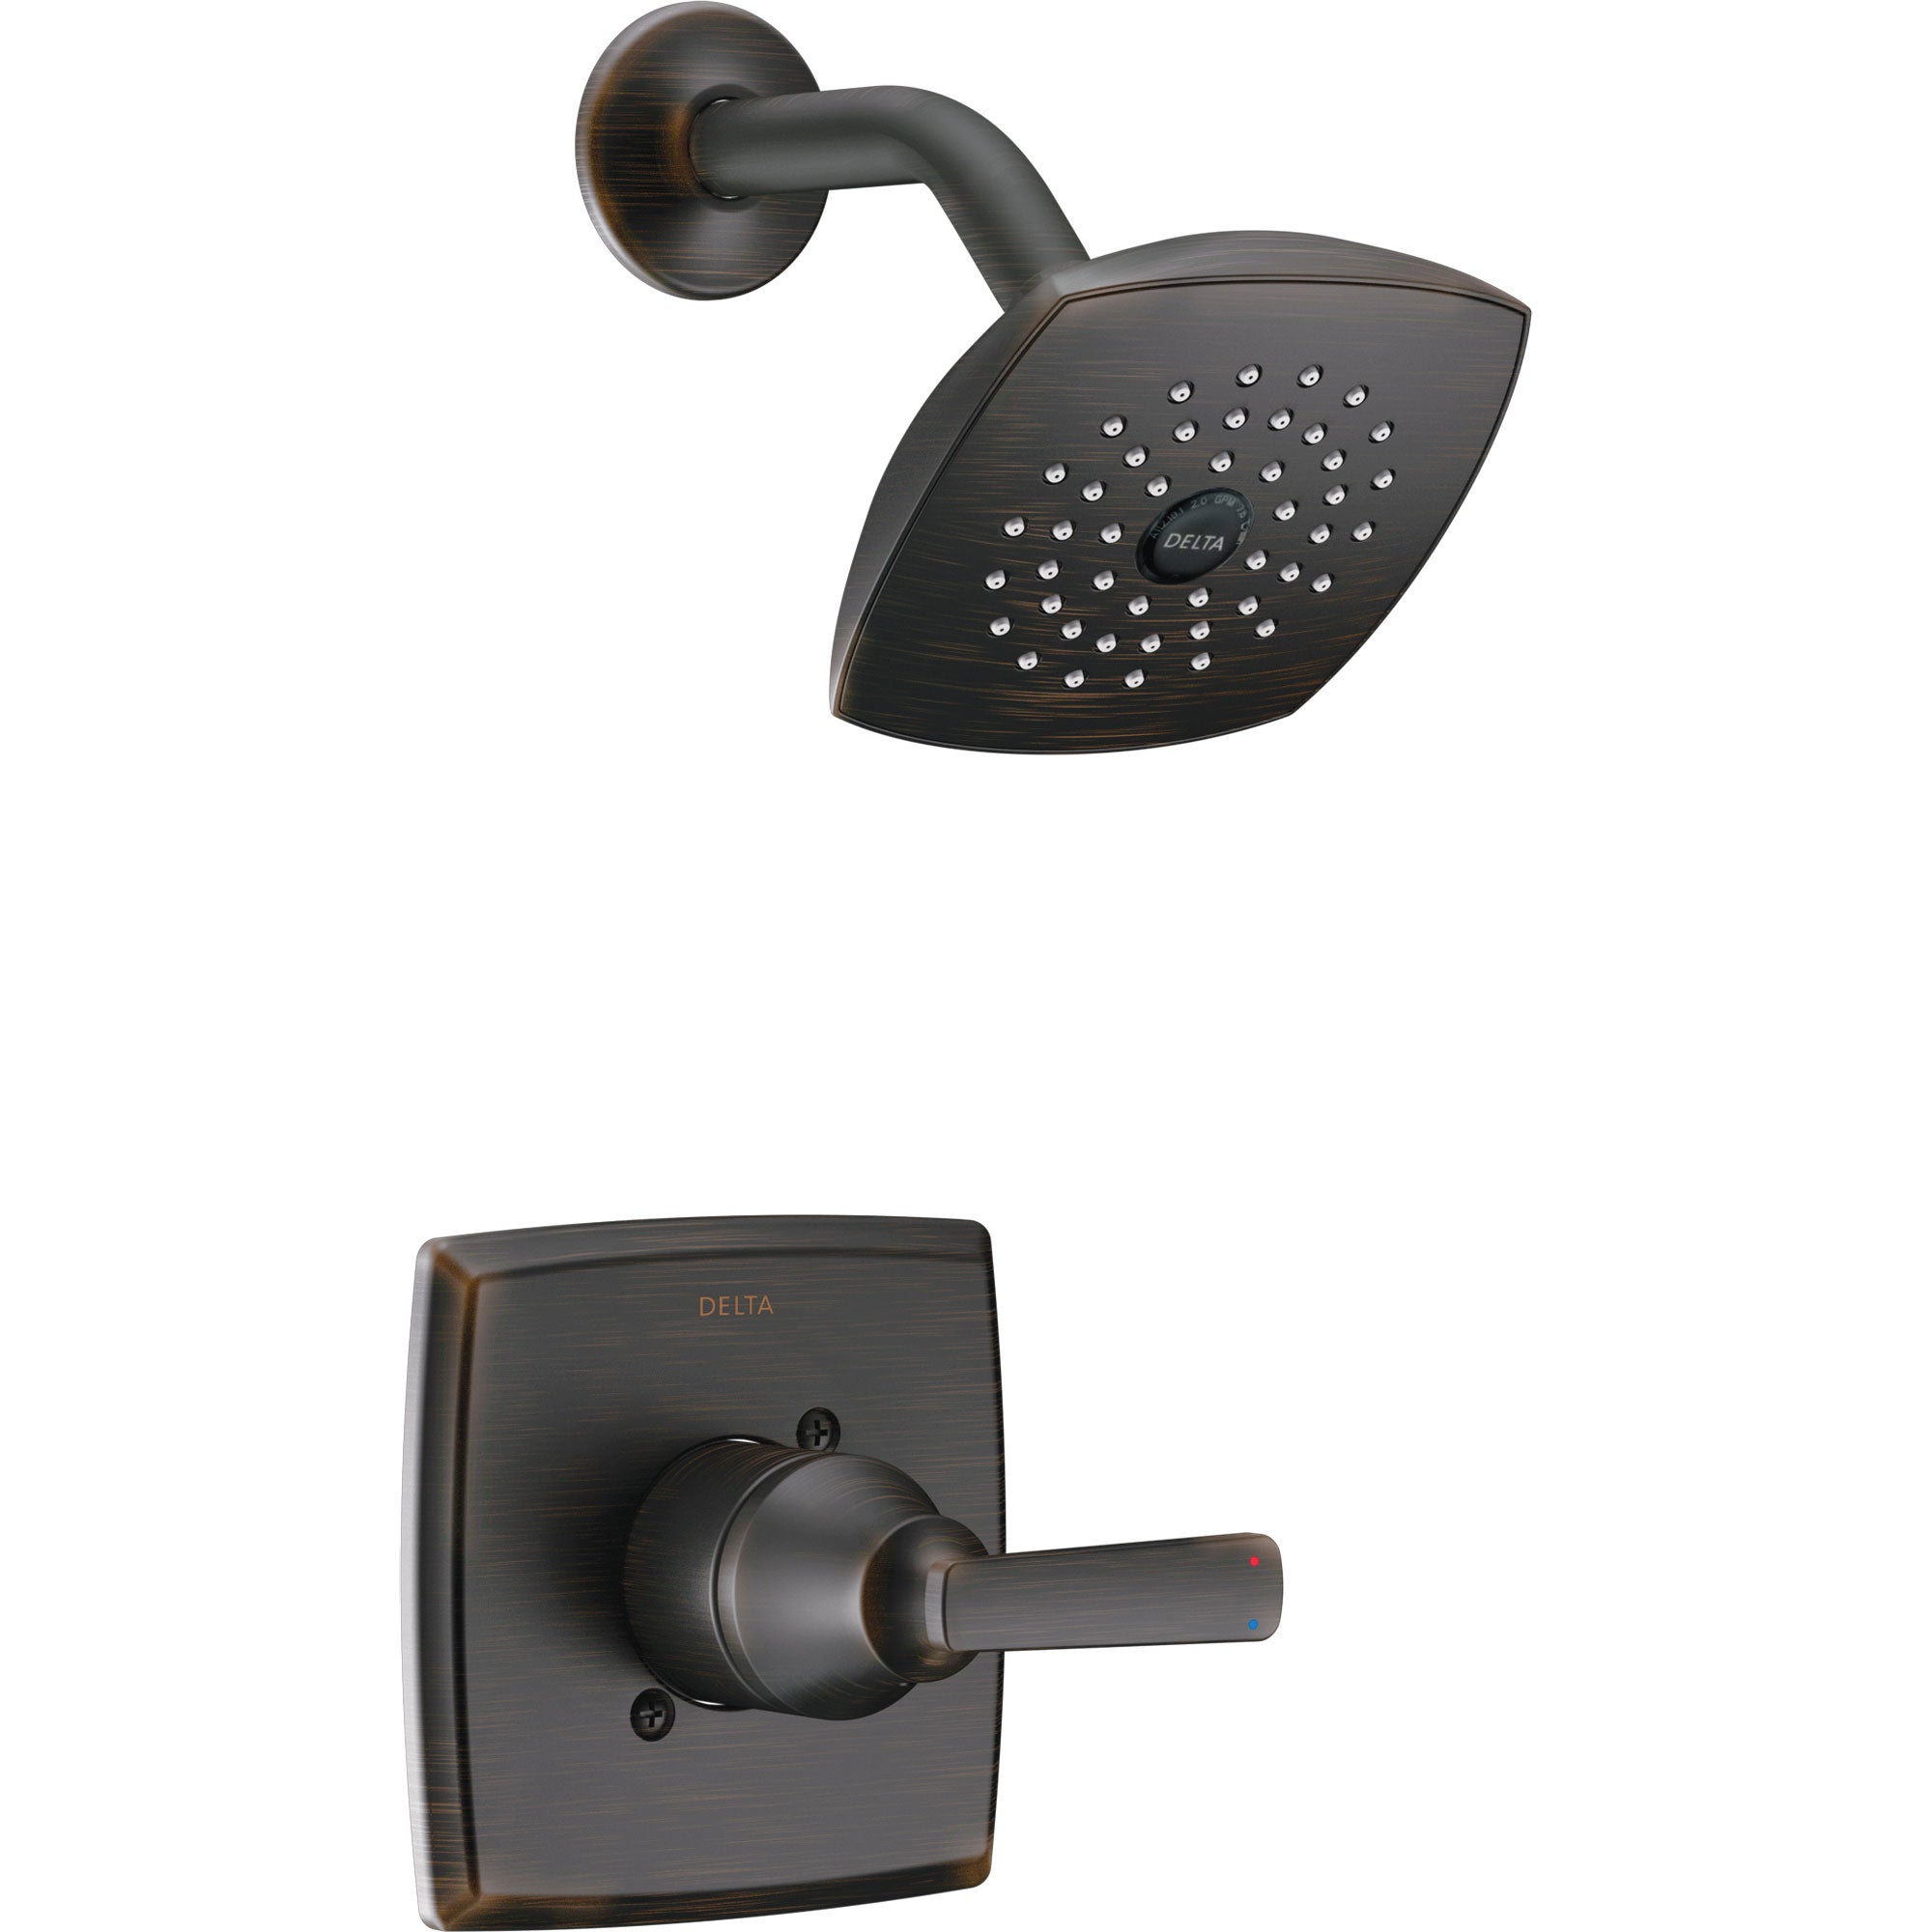 Delta Ashlyn Modern 14 Series Watersense Venetian Bronze Finish Single Handle Shower Only Faucet INCLUDES Rough-in Valve with Stops D1233V